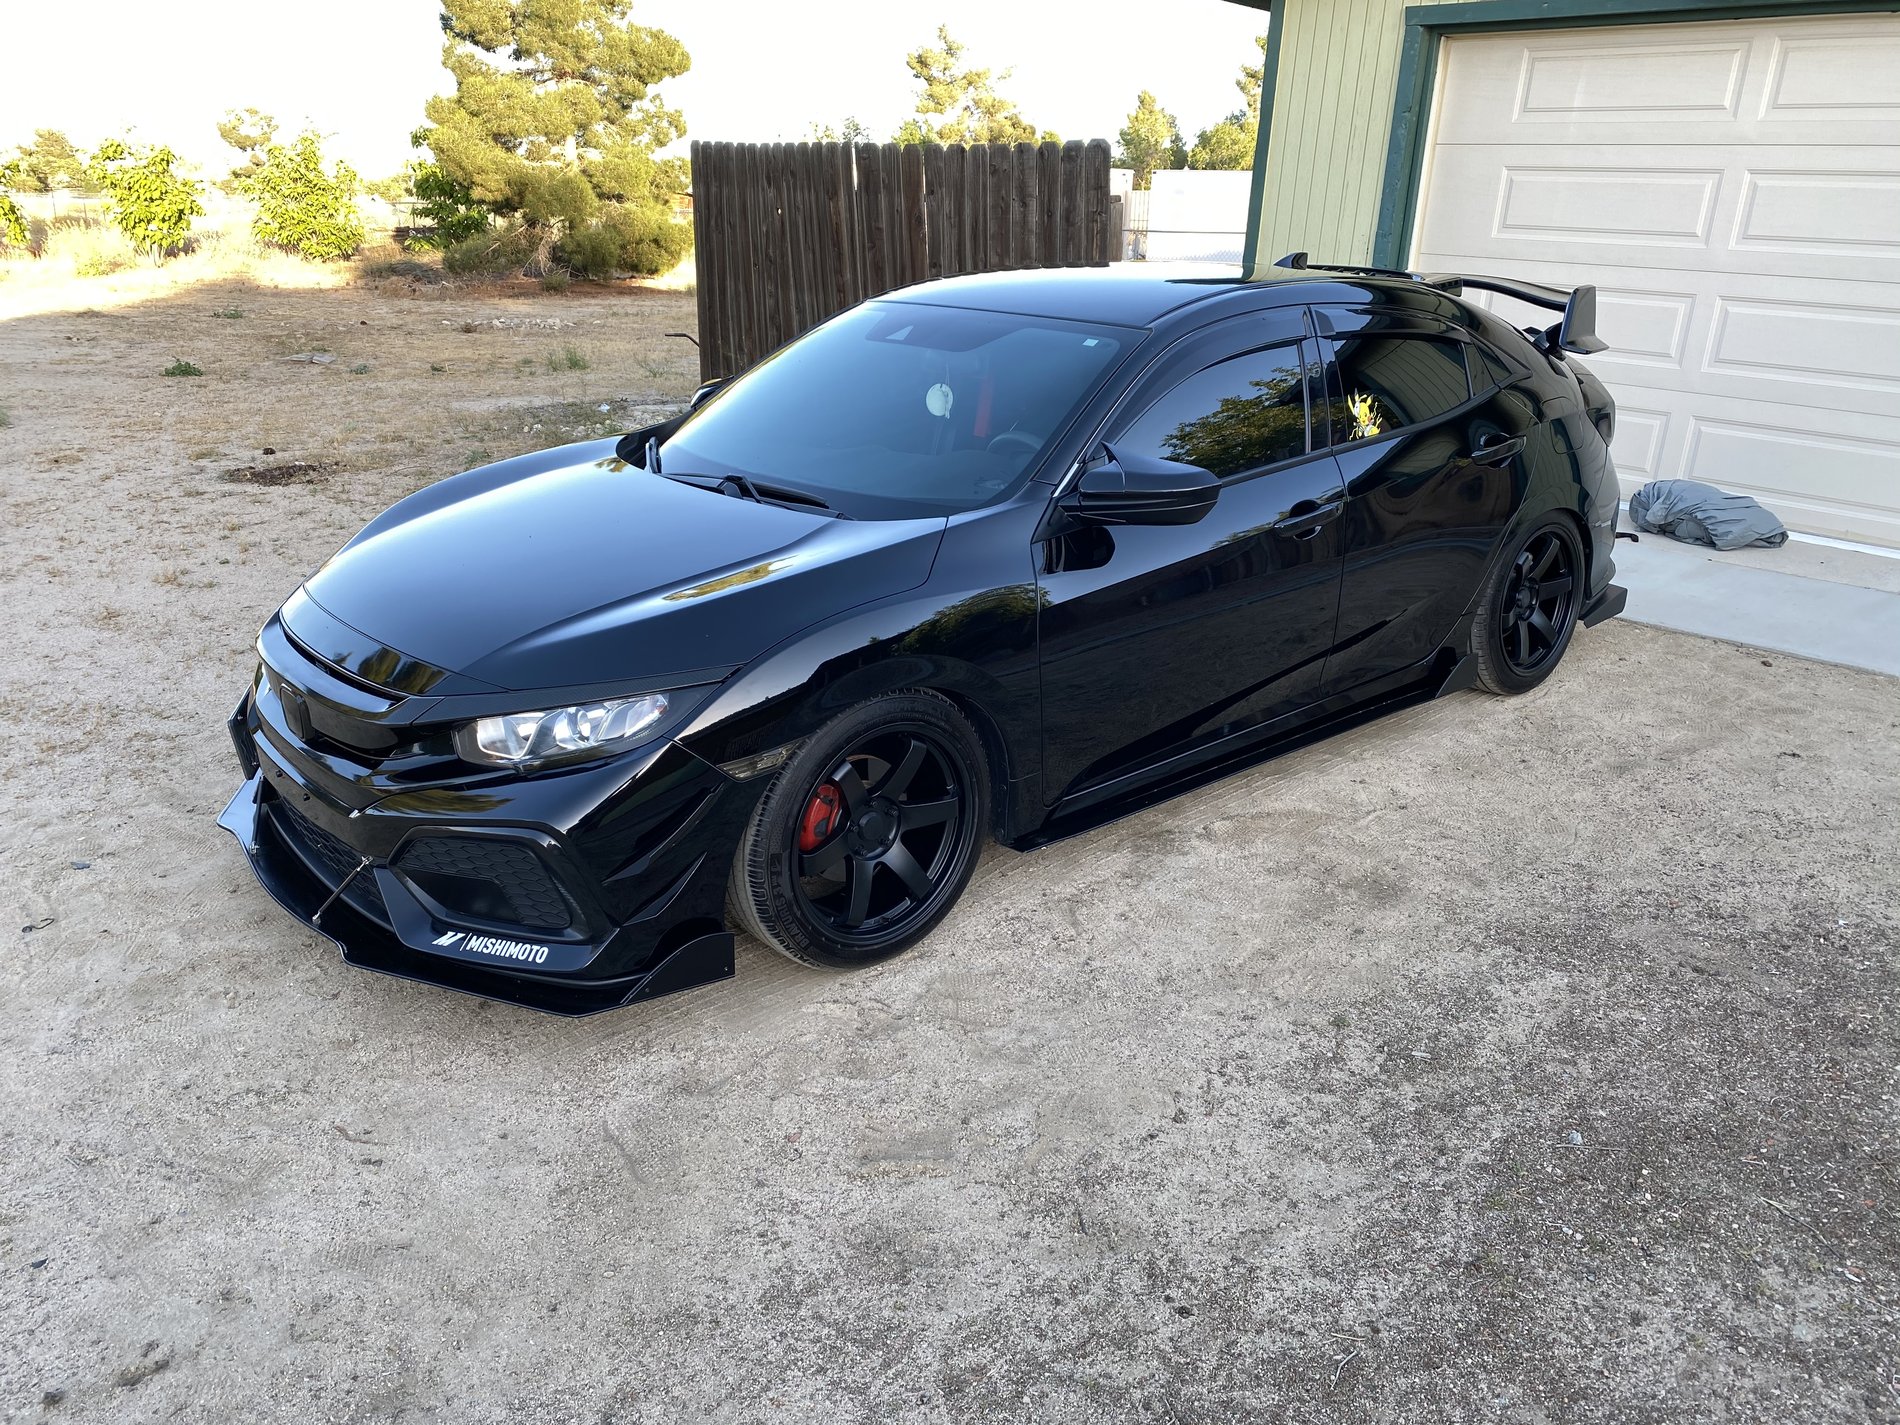 Honda Civic 10th gen What did you do to your Civic today? (II) A96BE837-6C15-4971-A378-0F1FD16AB975